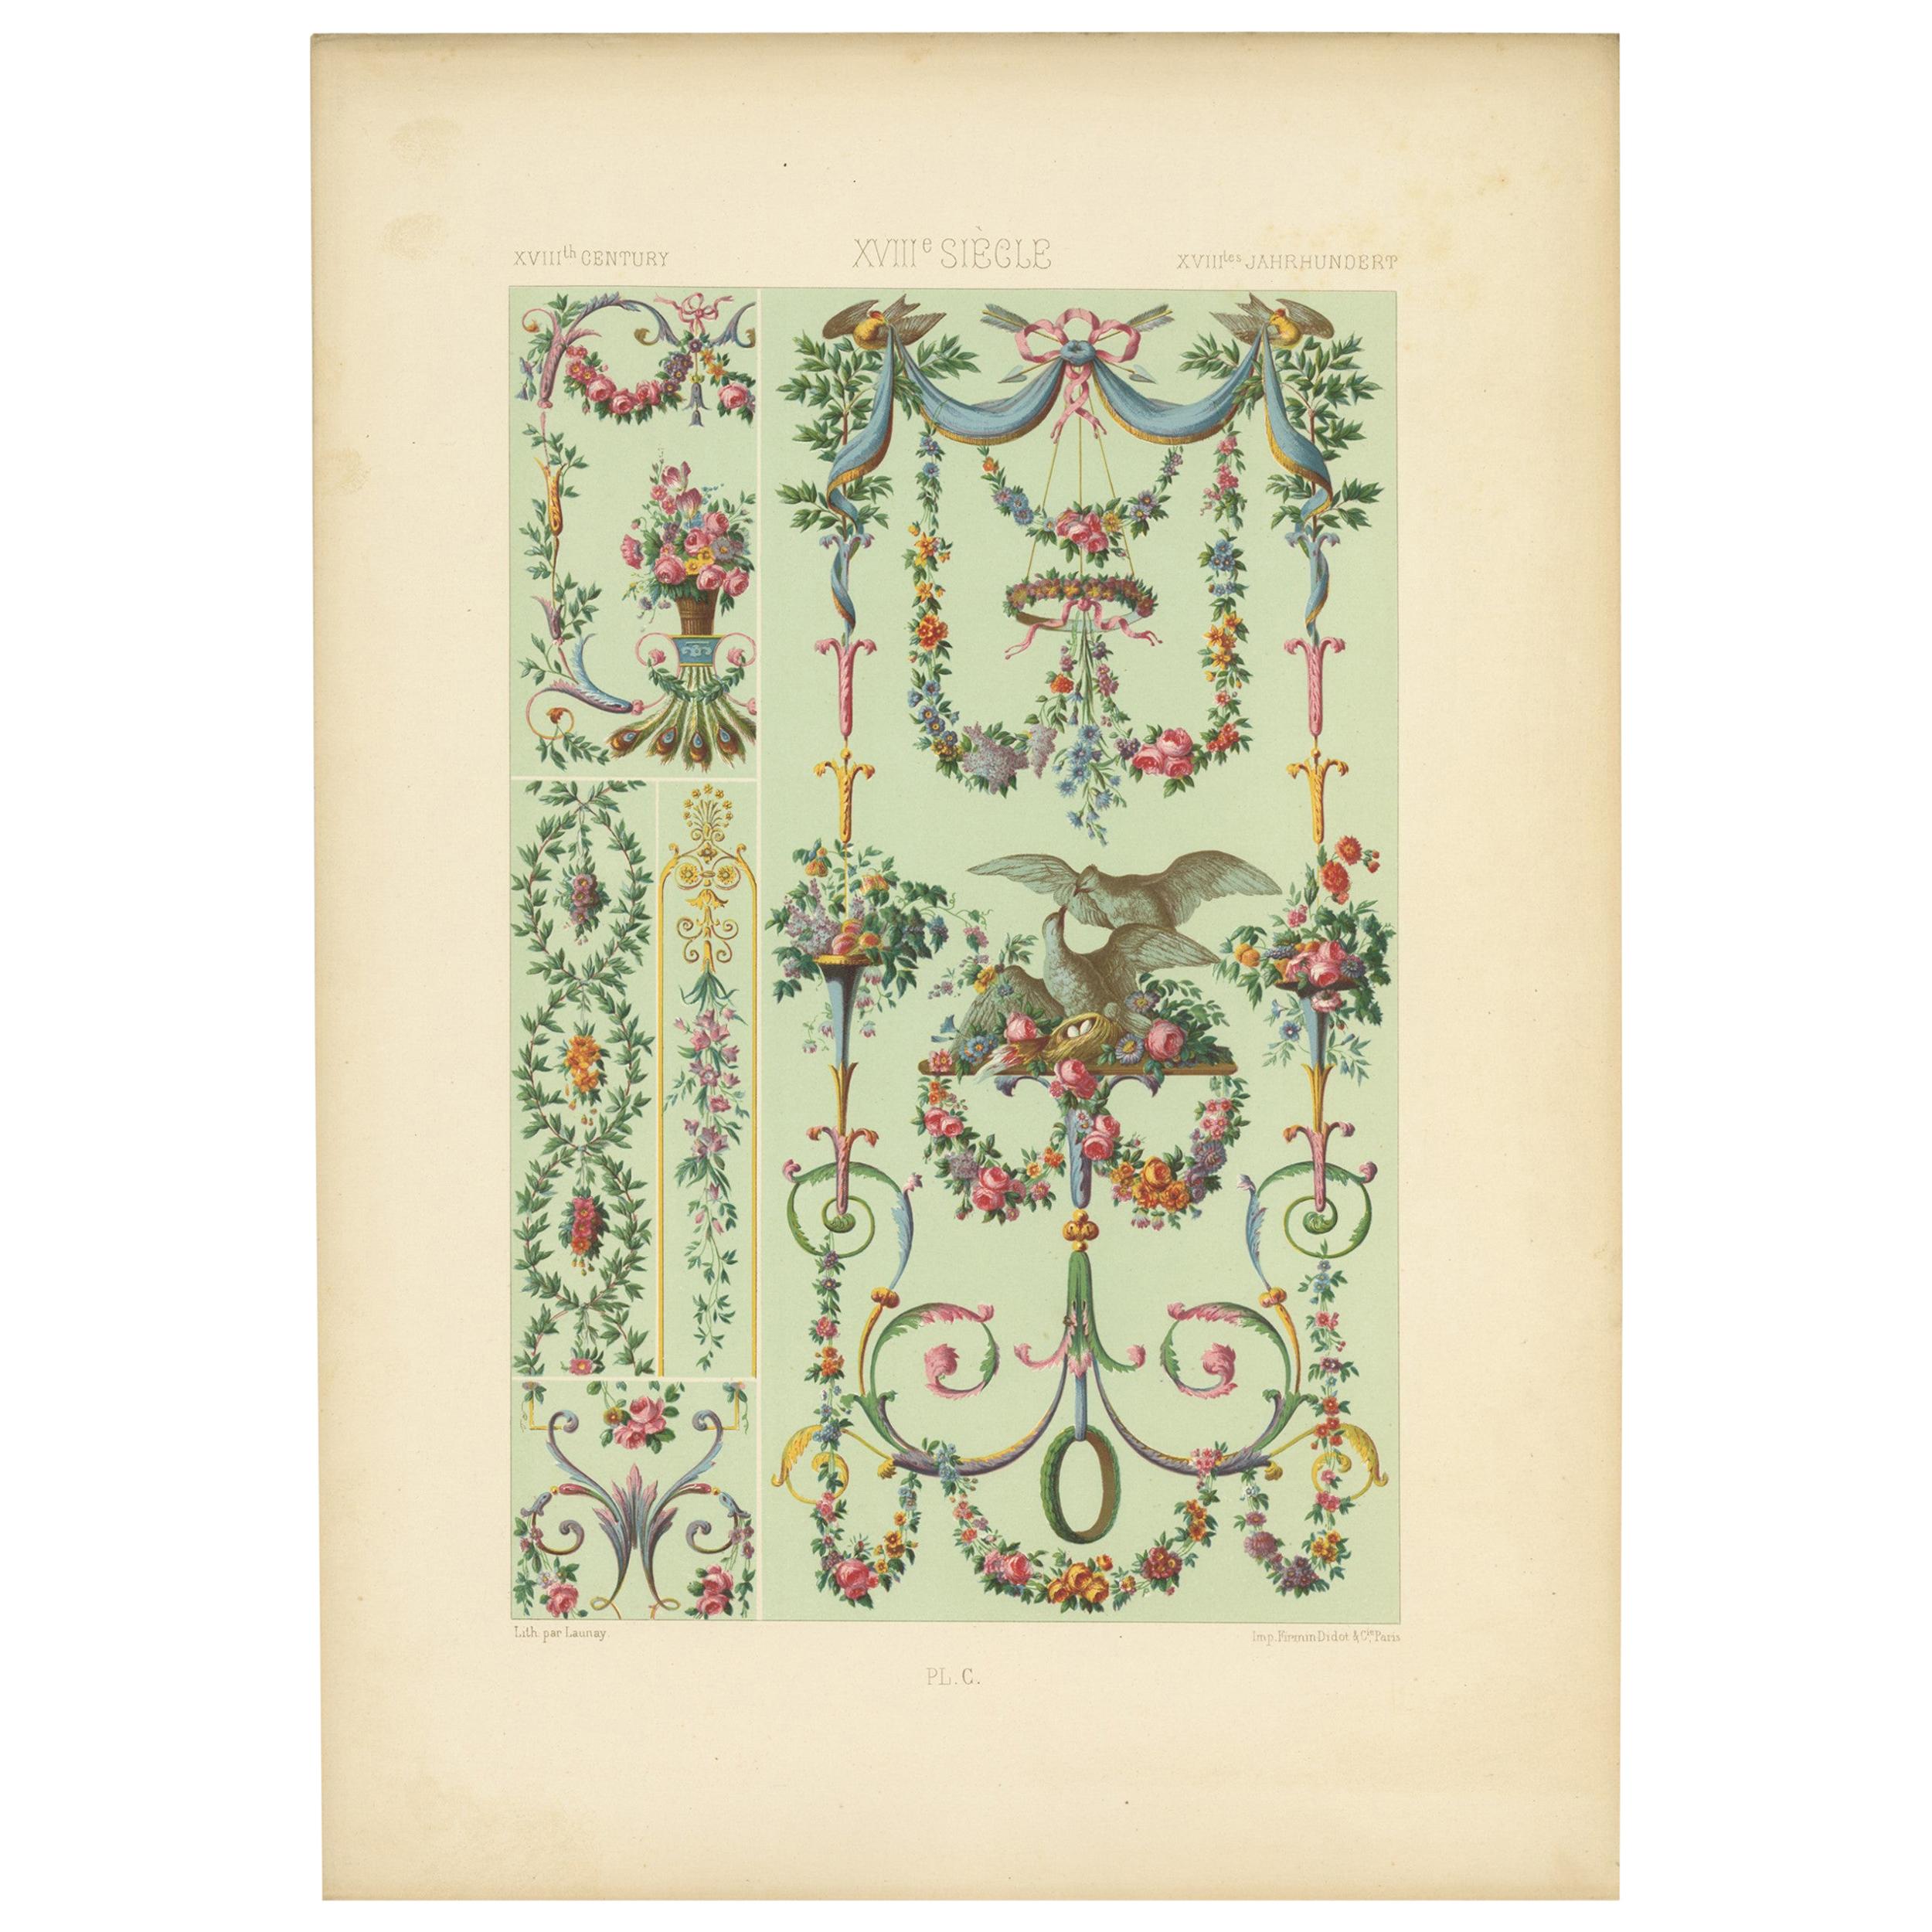 Pl. 100 Antique Print of XVIIIth Century Ornaments by Racinet (c.1890) For Sale